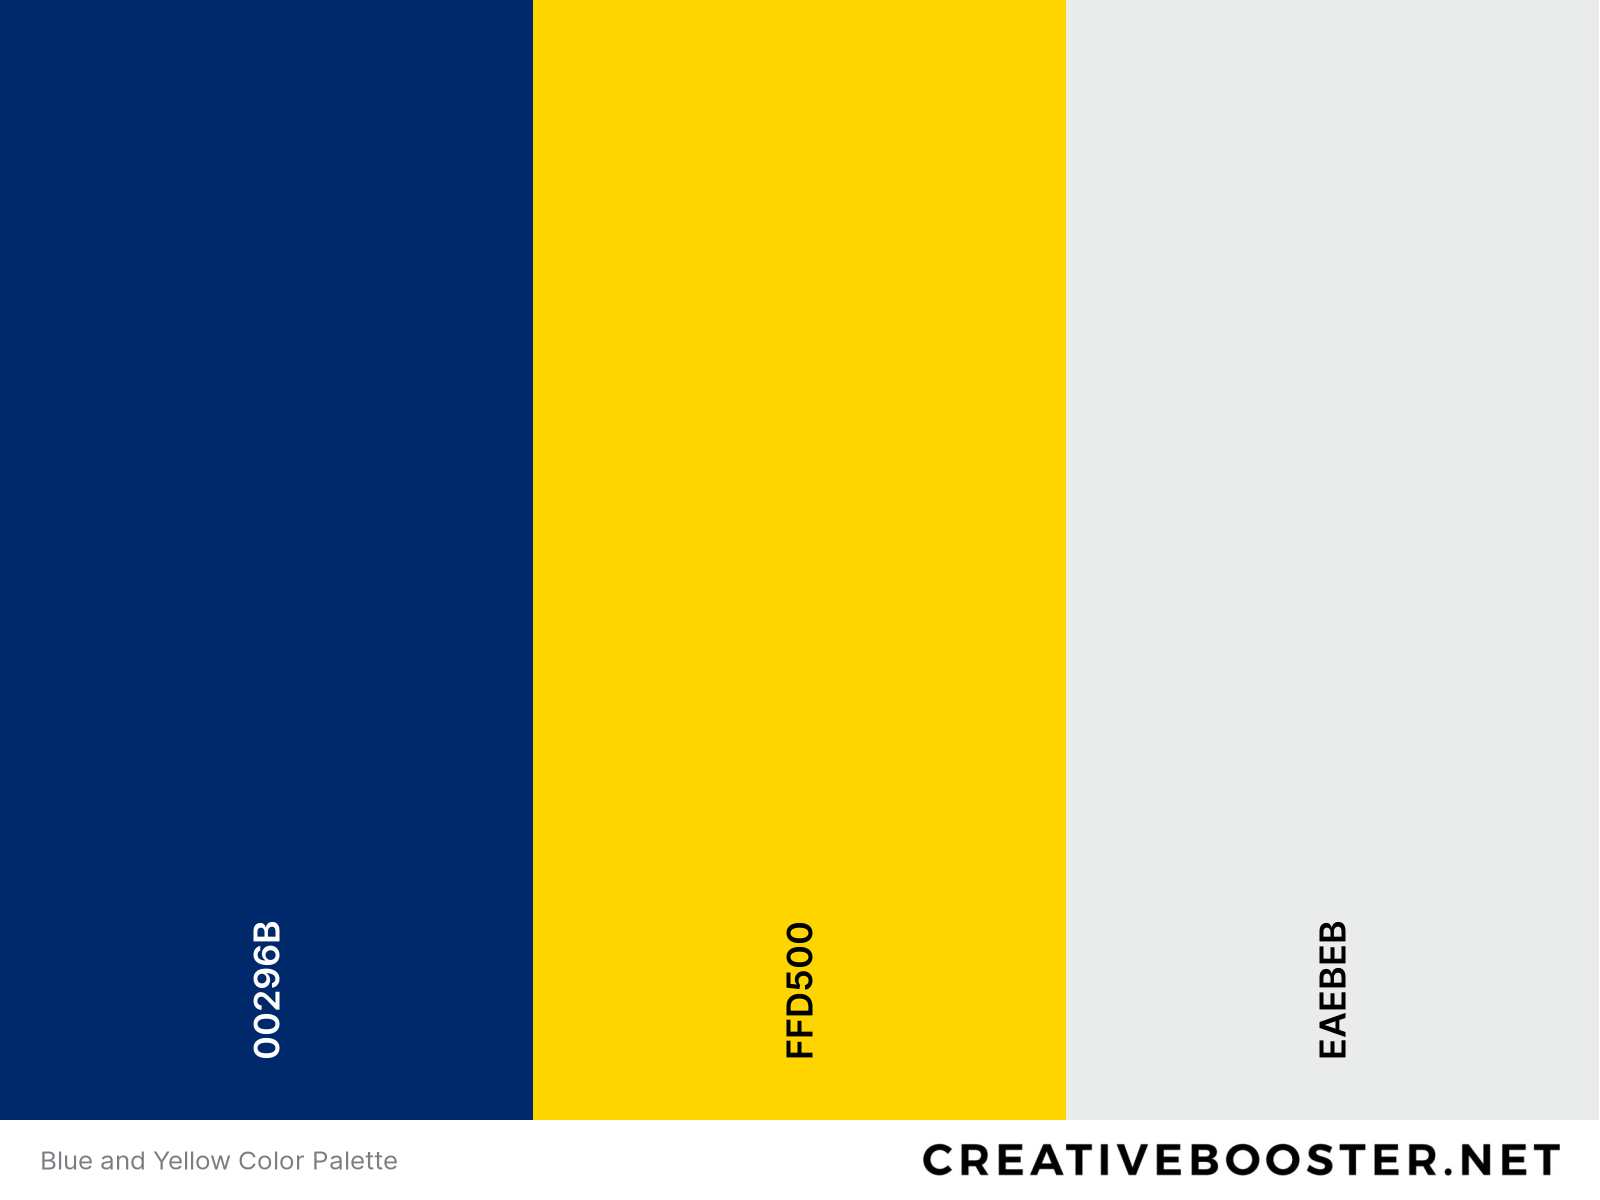 Blue and Yellow Color Palette